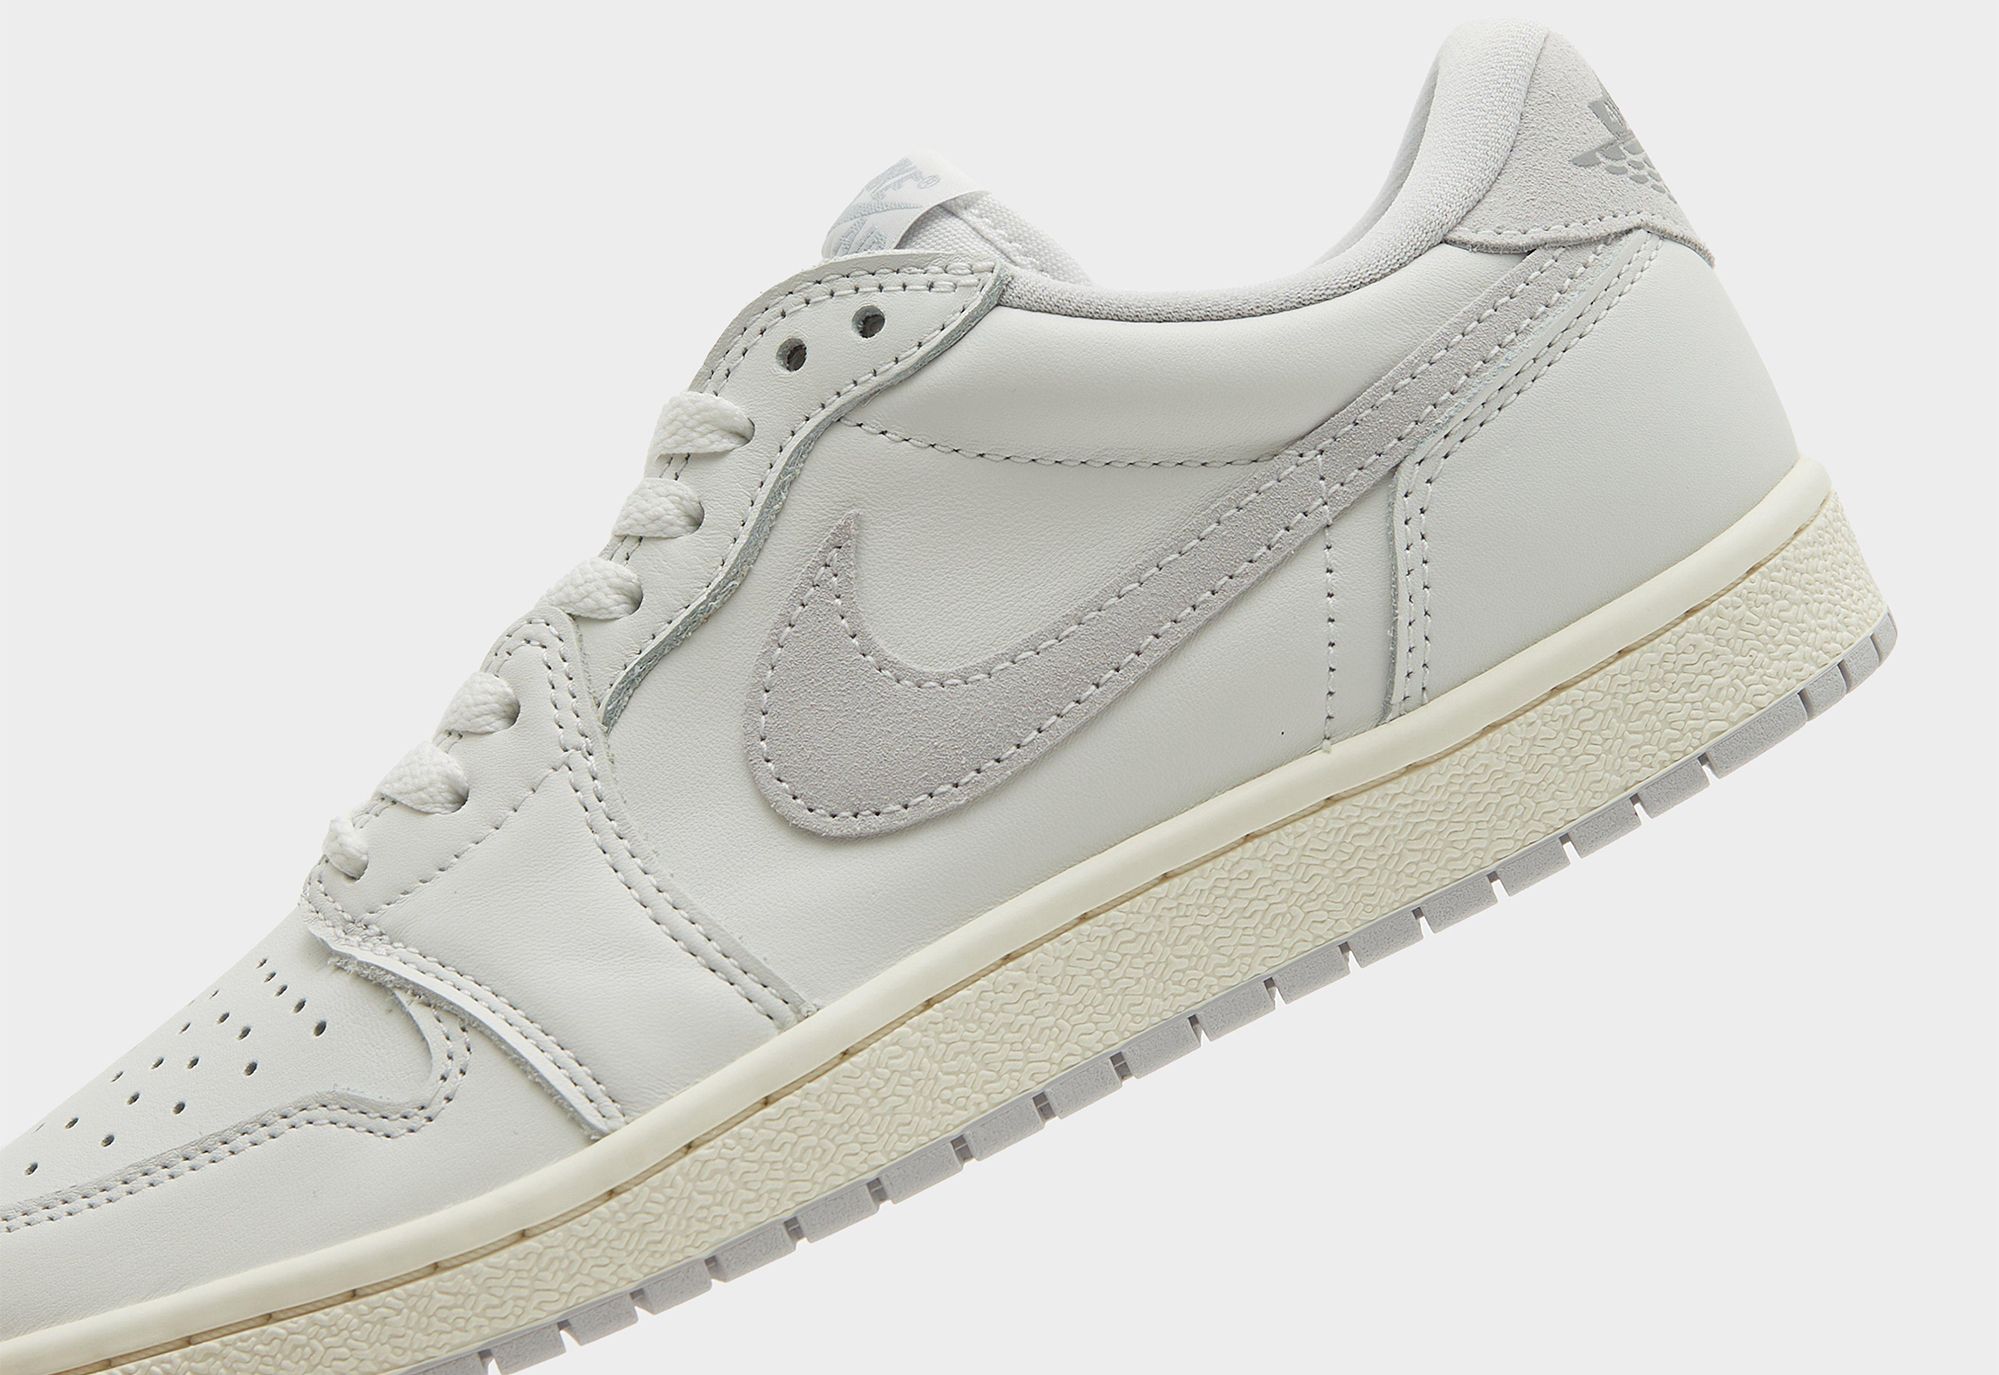 Where to Buy the Air Jordan 1 Low '85 “Neutral Grey” | House of Heat°